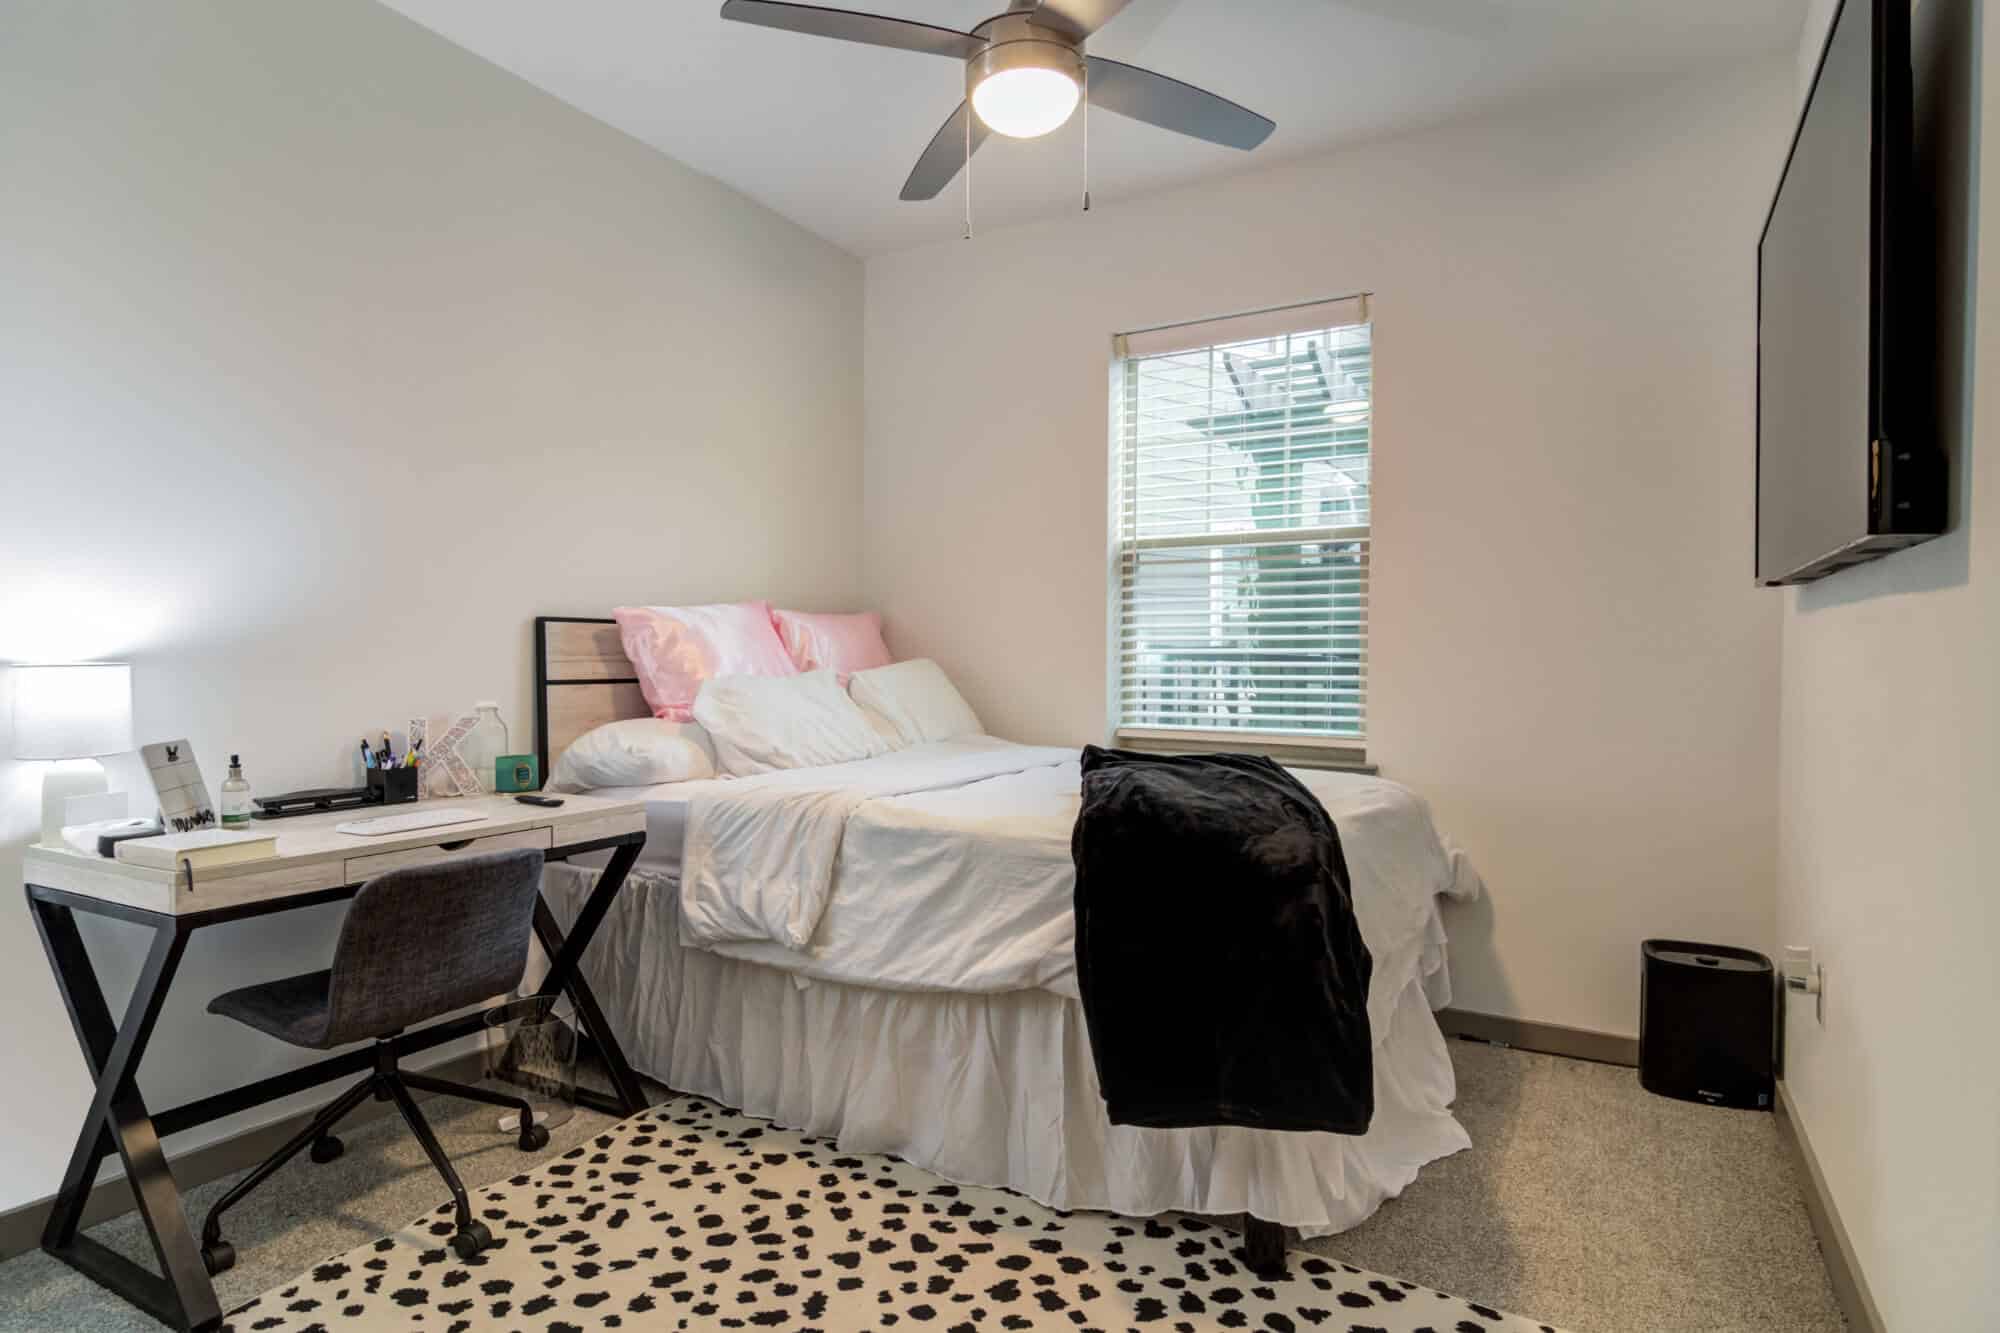 14 sixtyfive off campus apartments near kennesaw university fully furnished bedrooms queen pillow top mattresses